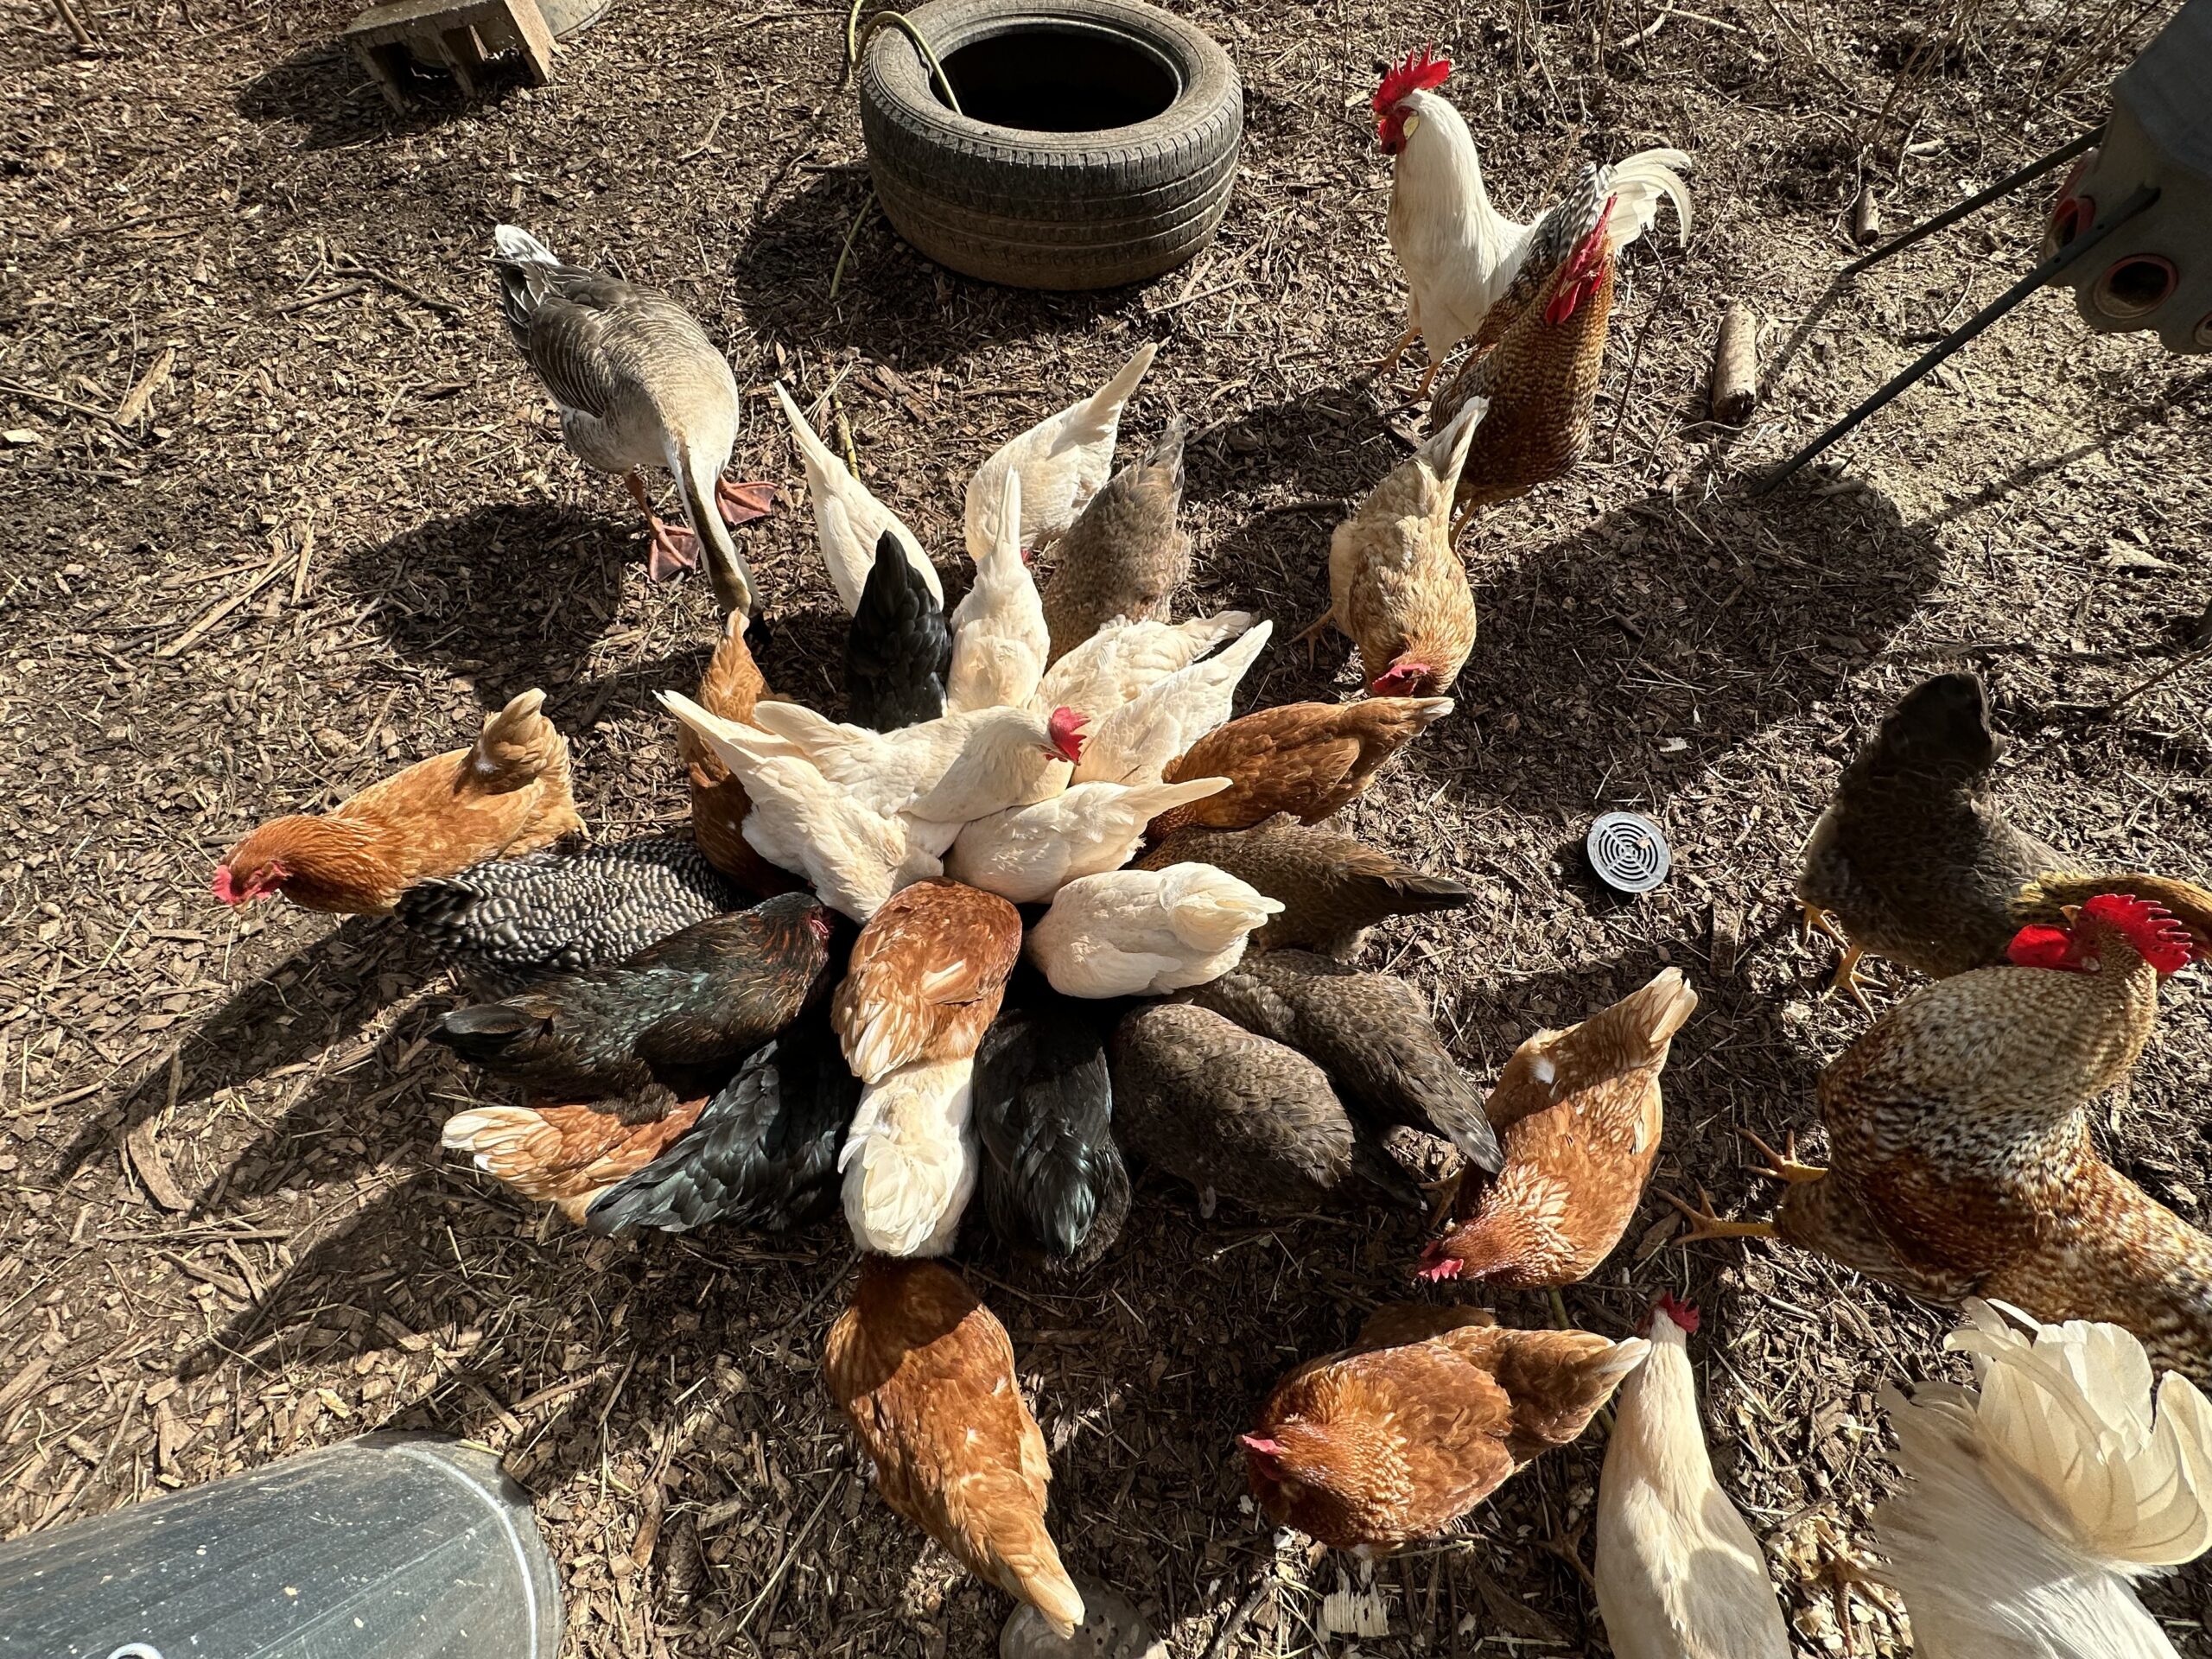 We went from 16 to 42 chickens in two years.